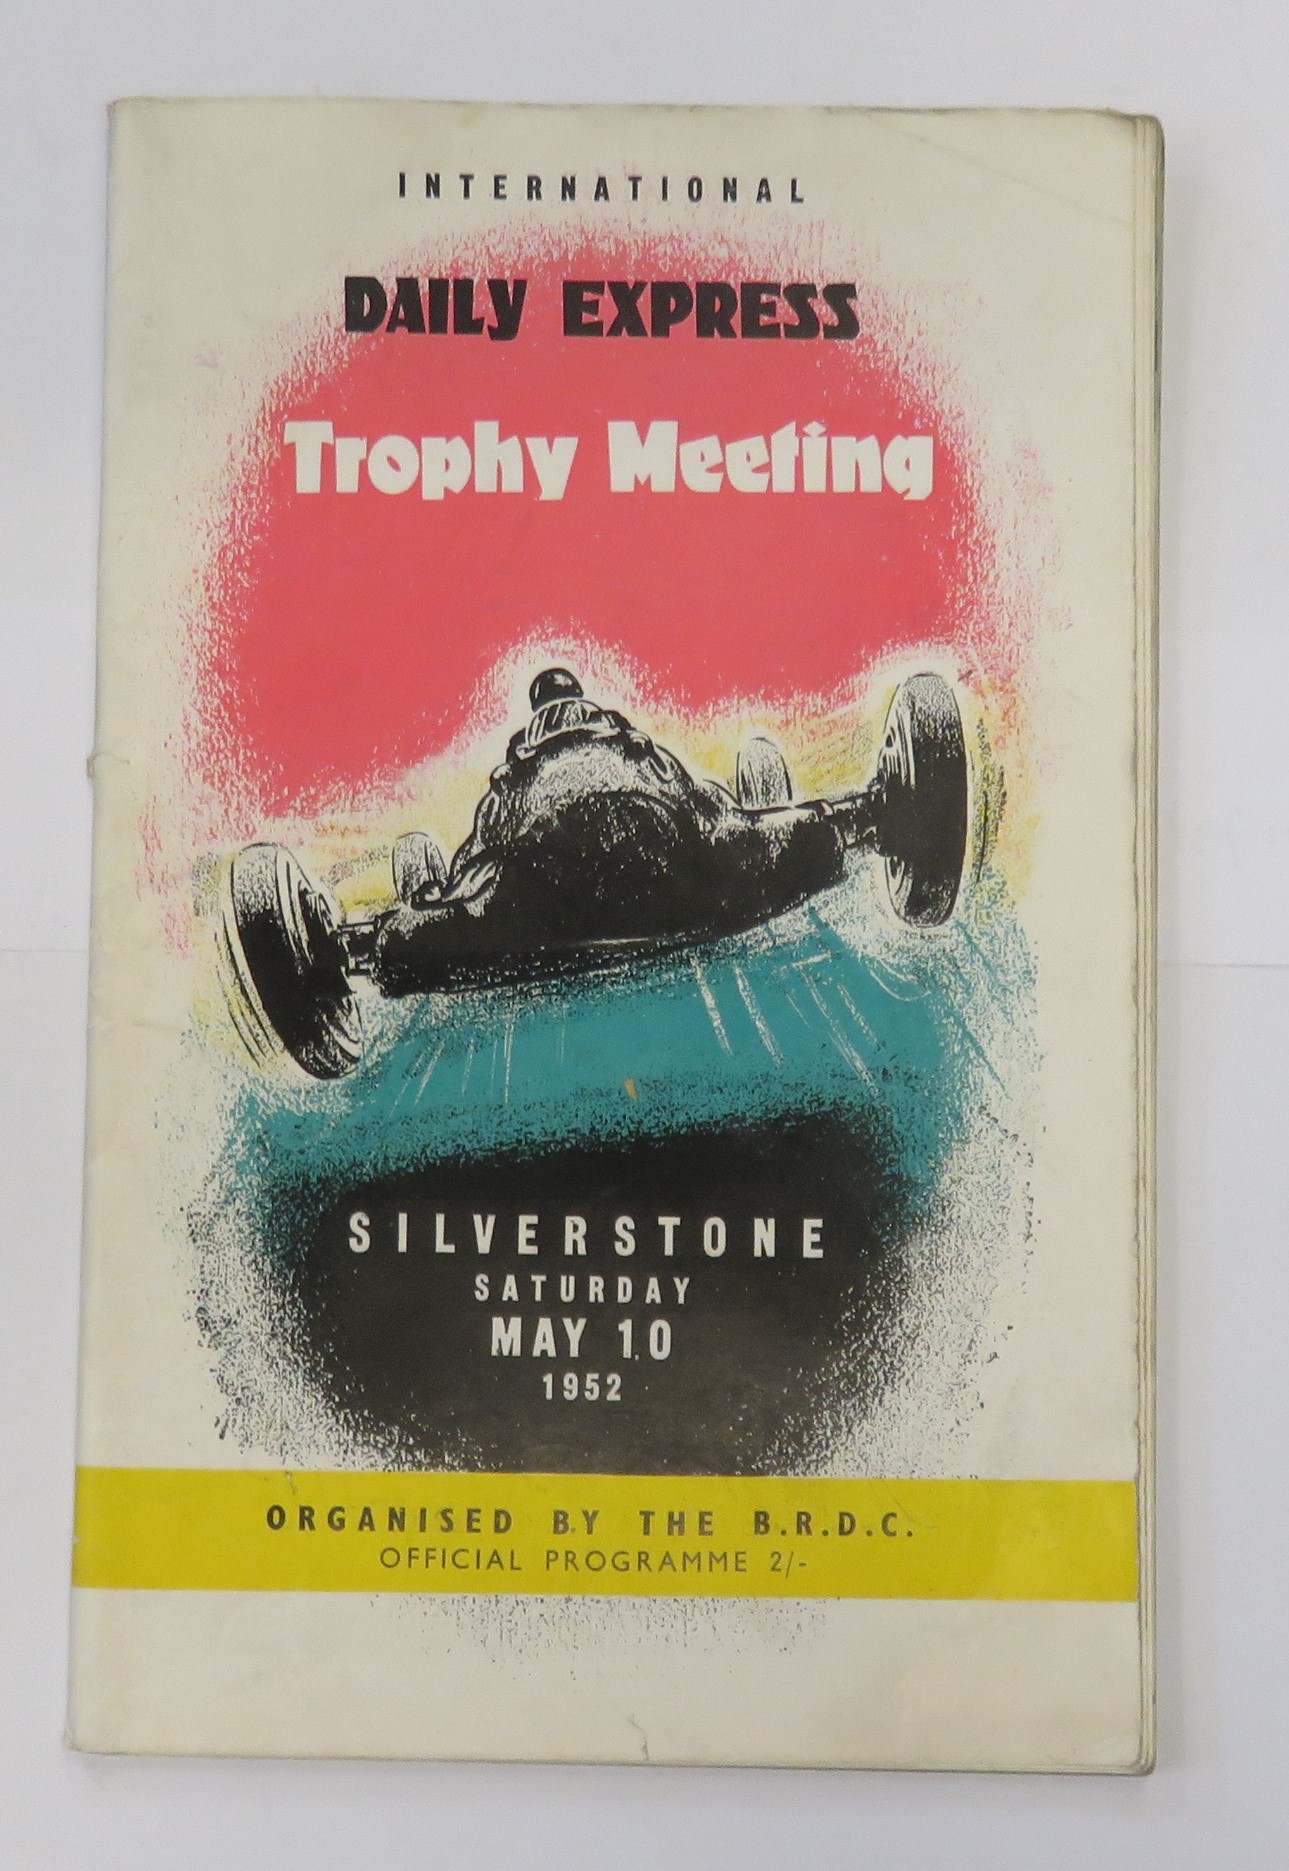 International Daily Express Trophy Meeting Silverstone Saturday May 10 1952